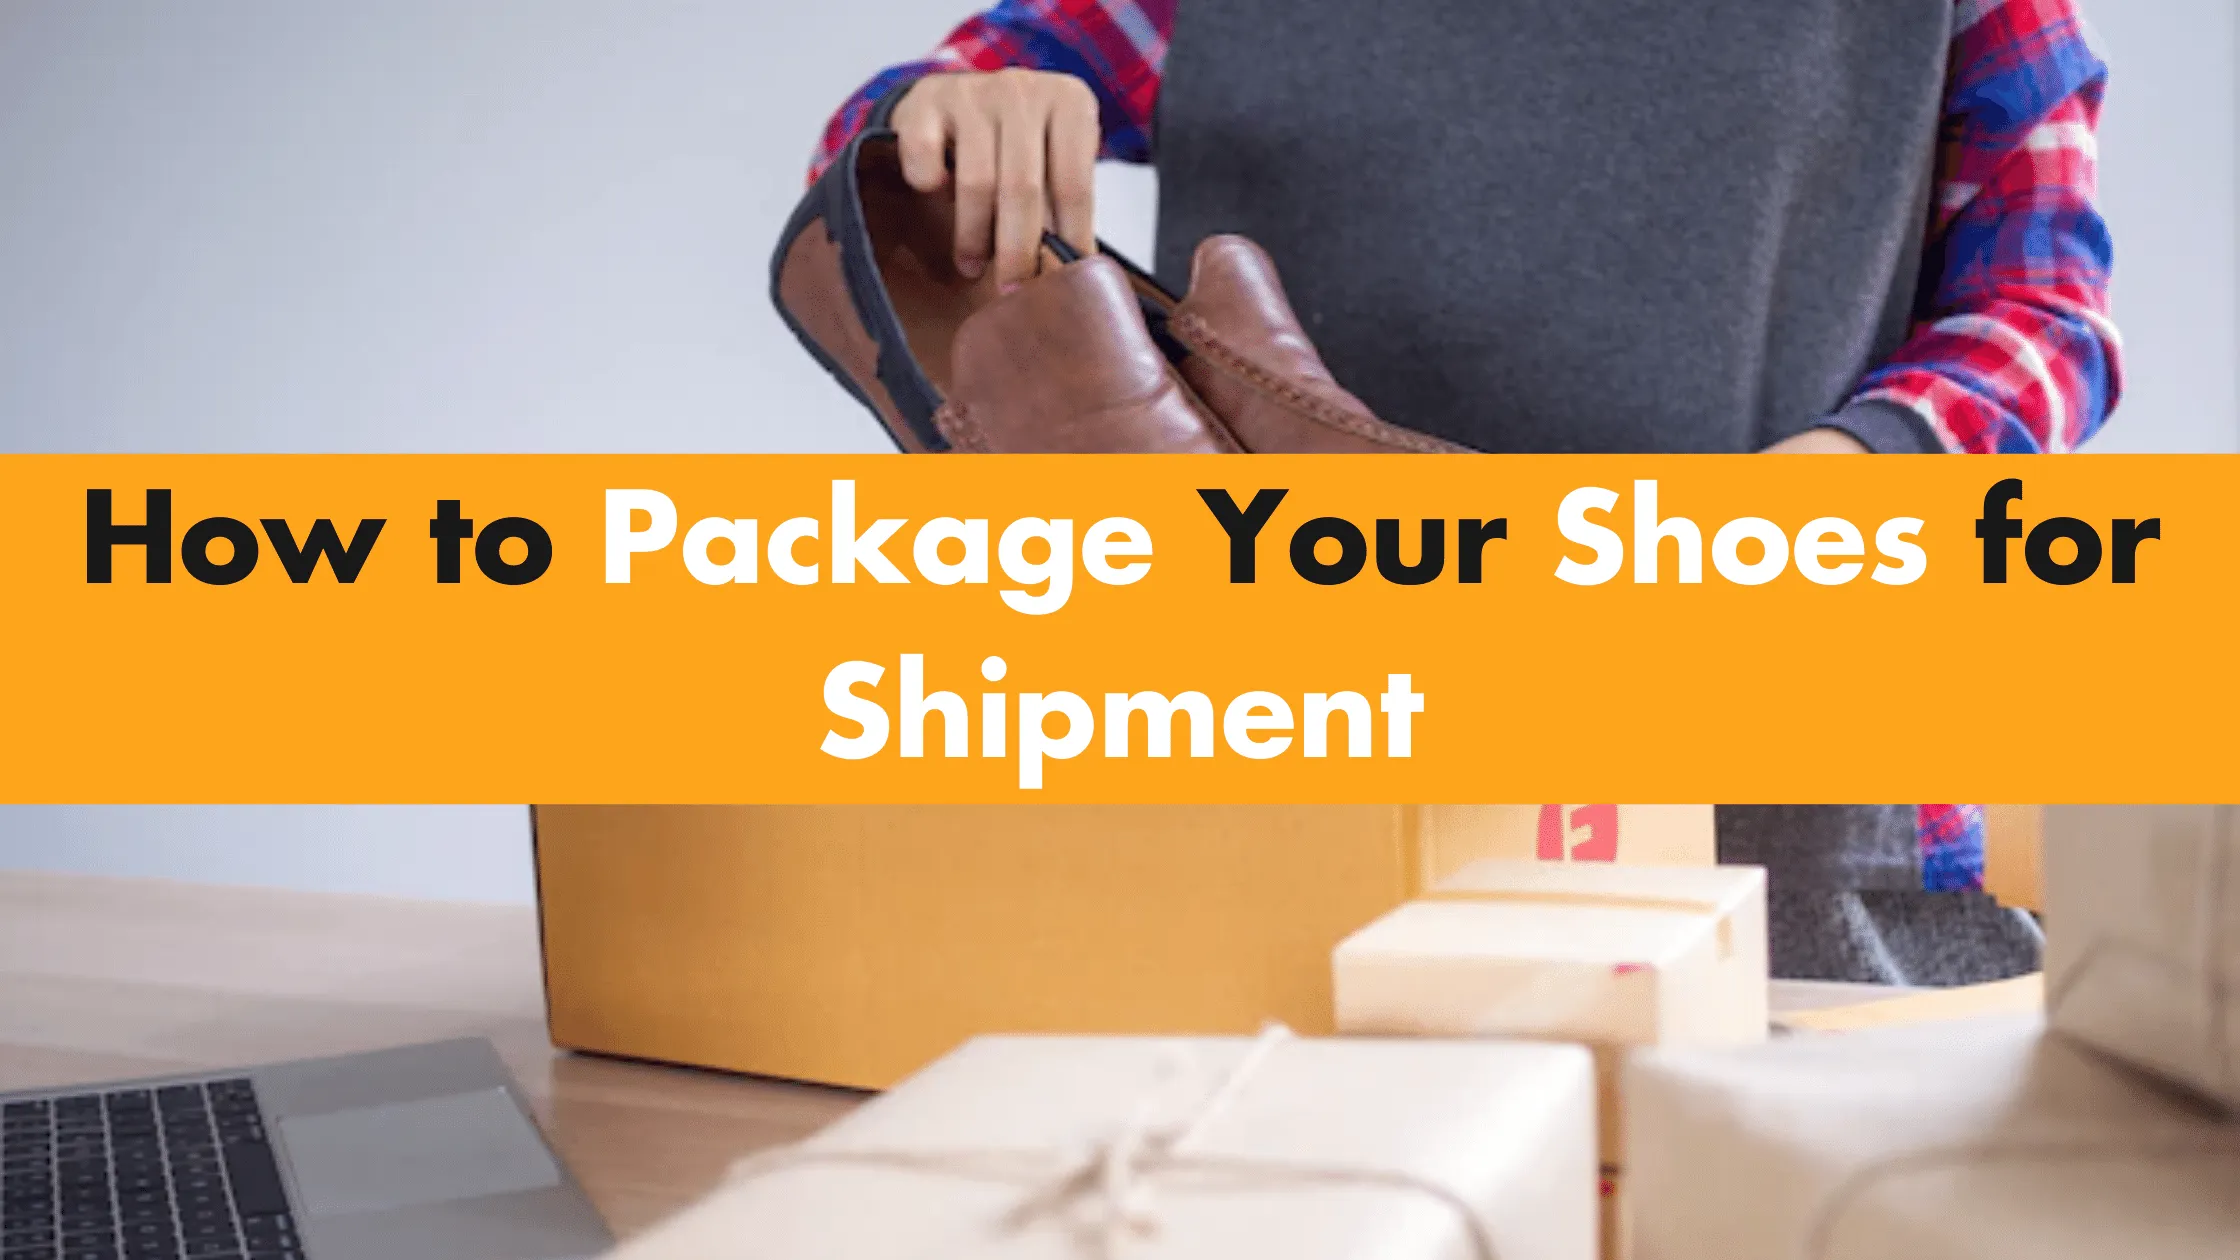 How to Package Your Shoes for Shipment